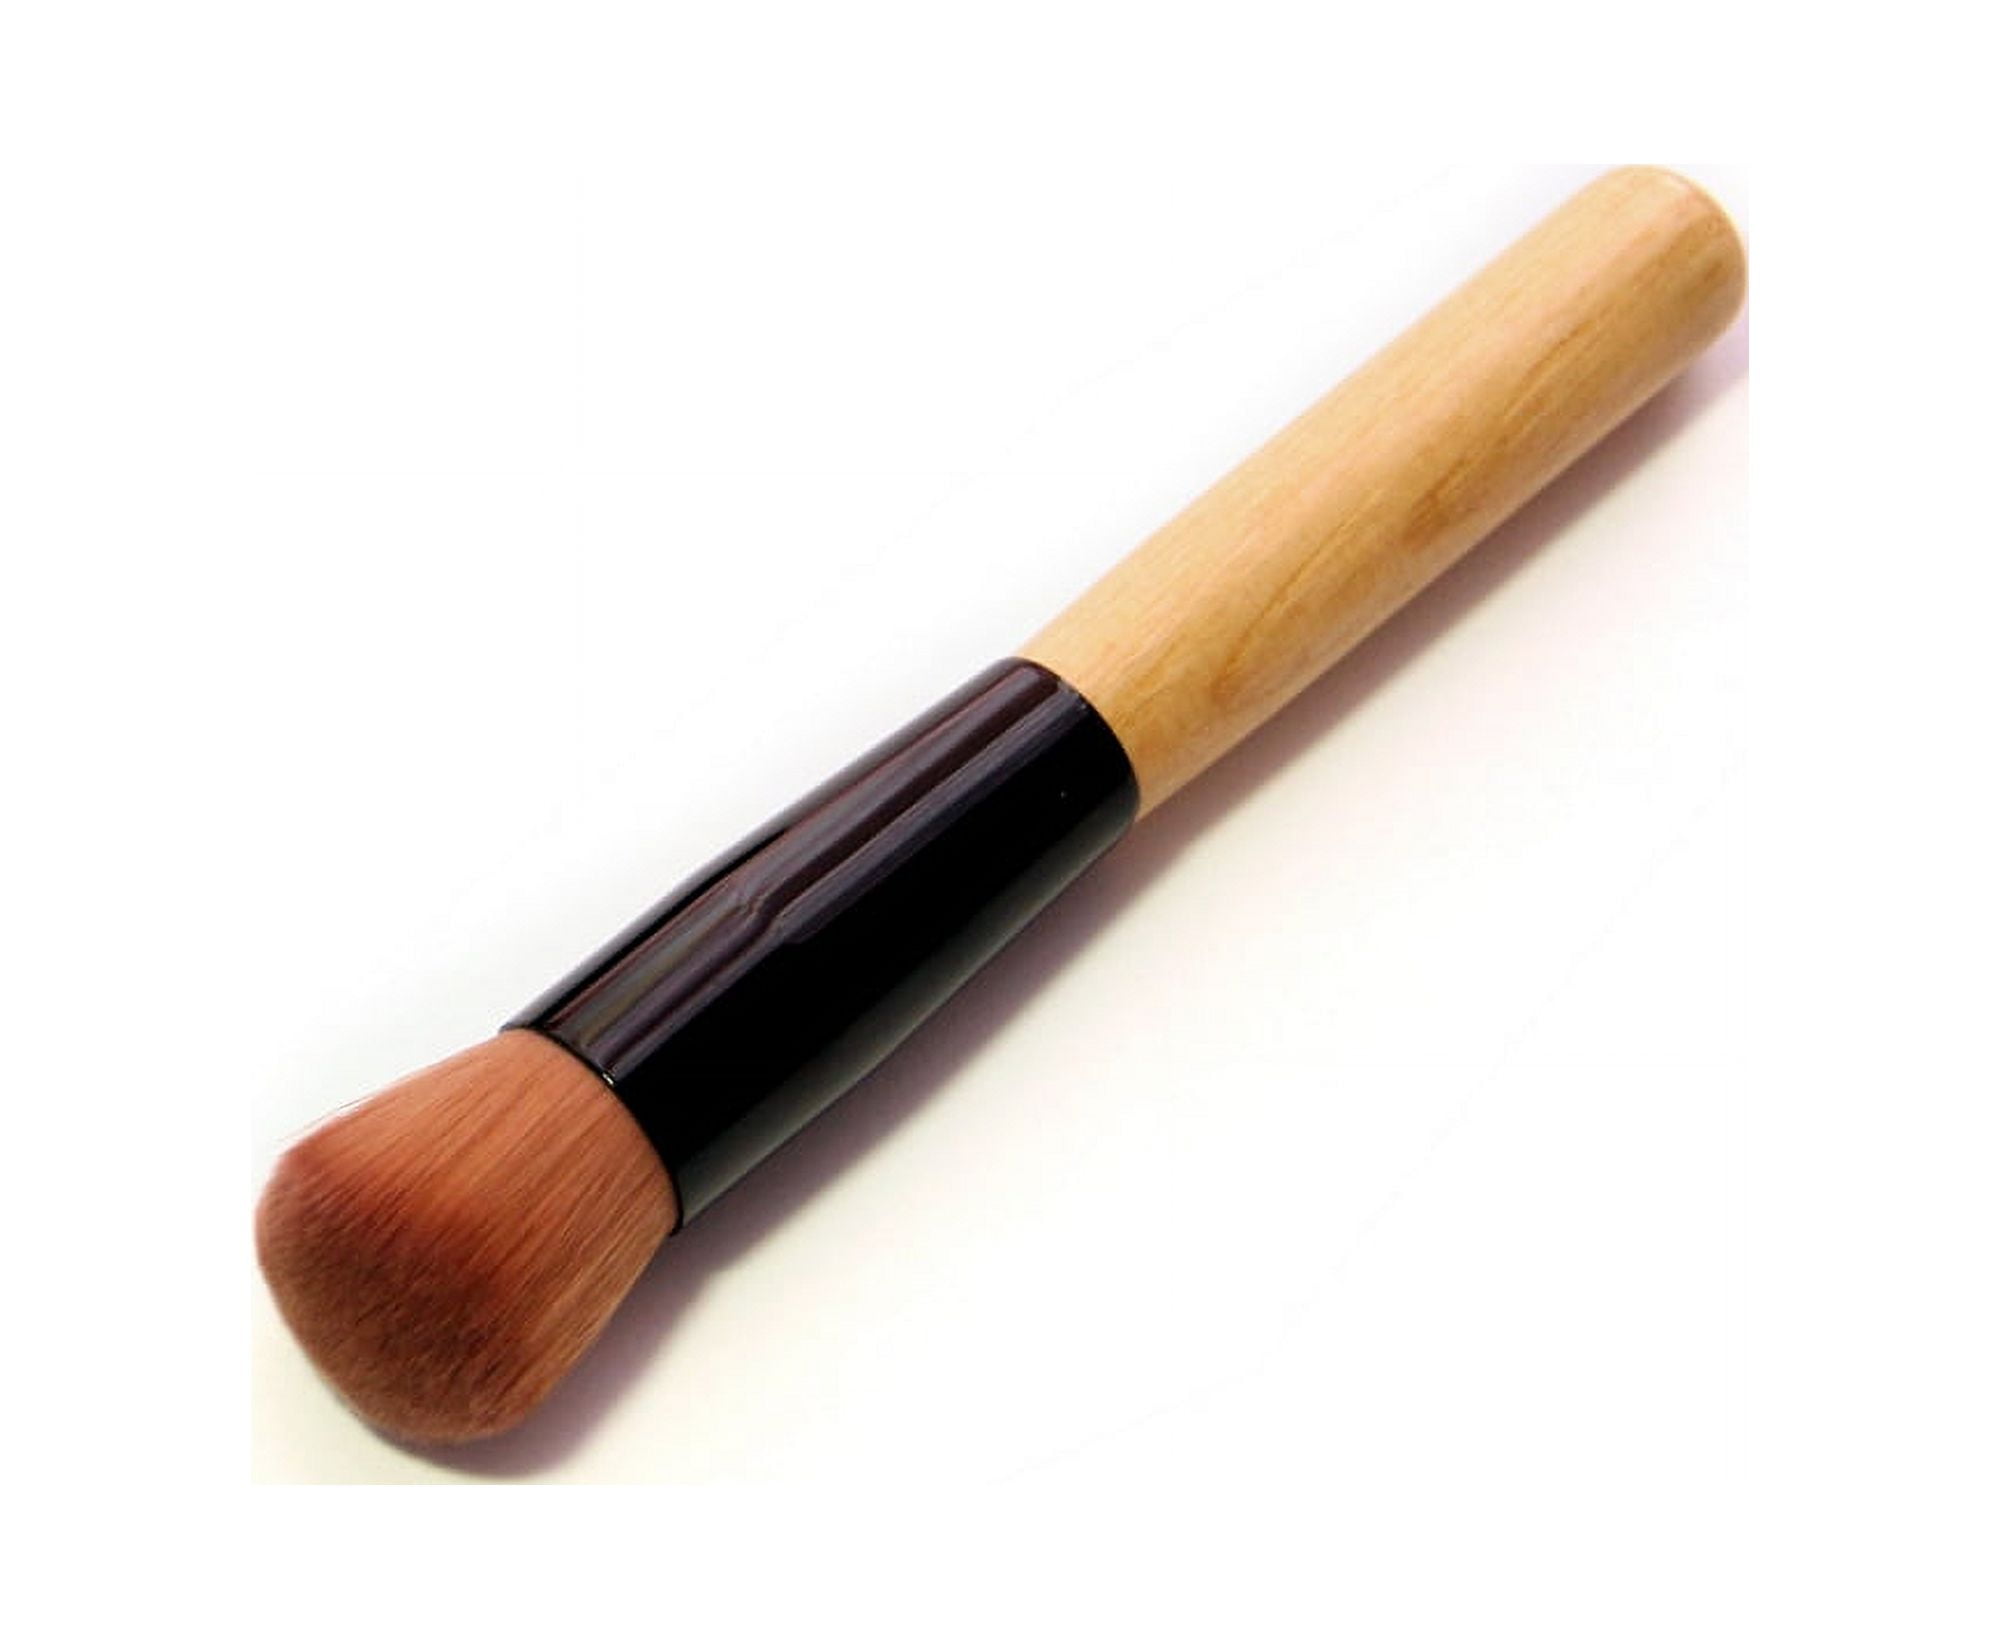 EPACK BB Multifunctional Viral Foundation Brush Set Flat Head, Liquid  Foundation, Loose Powder Brushes For Flawless Application From Onebest2014,  $1.53